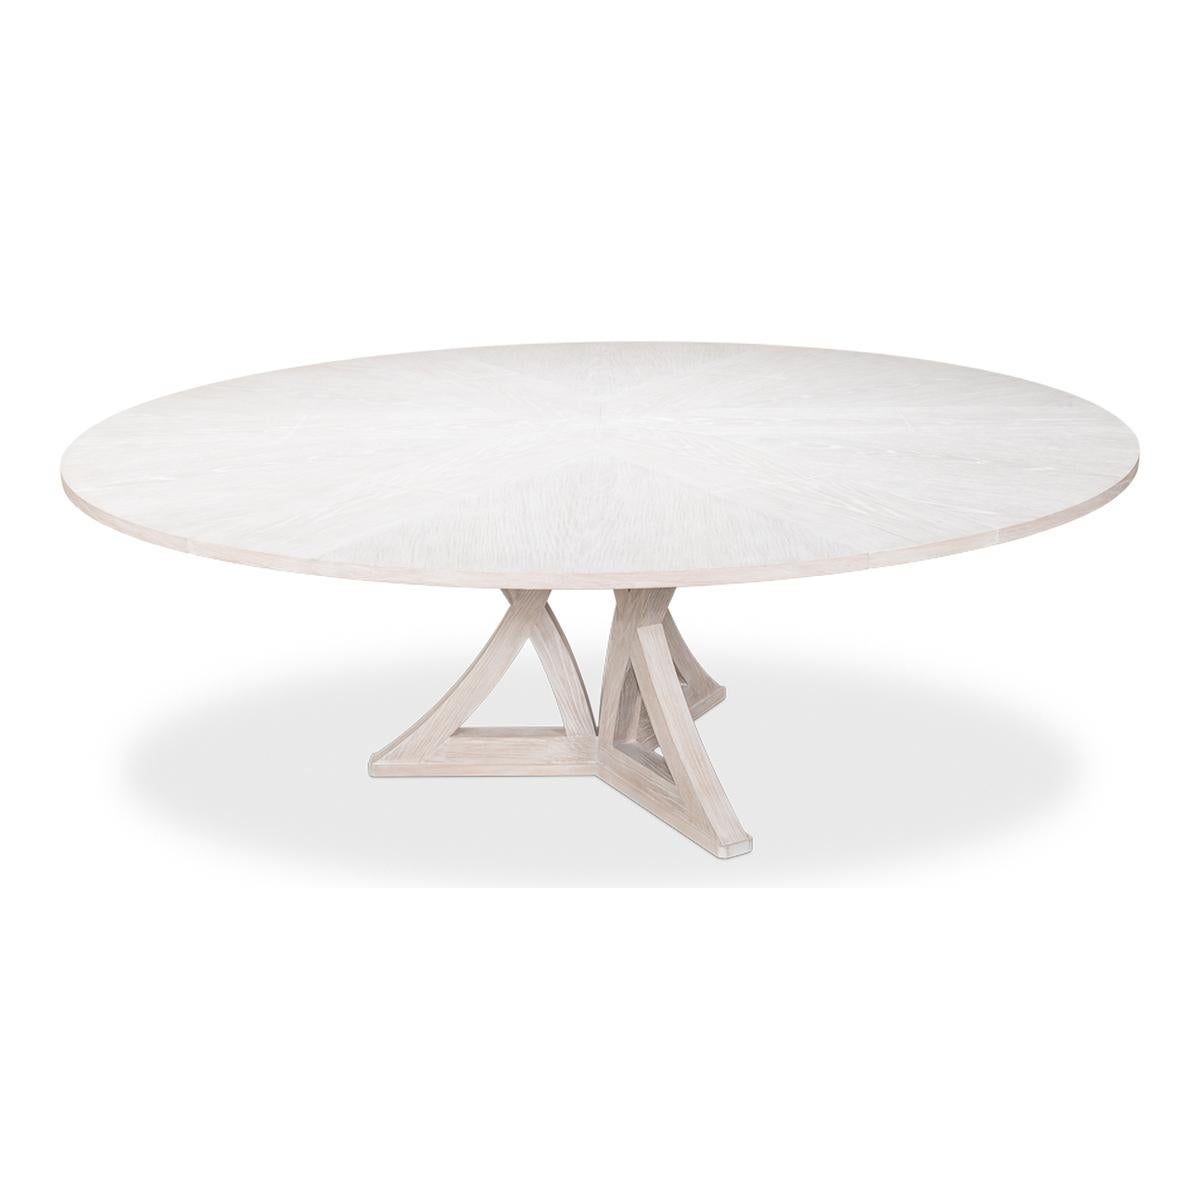 Rustic Round Dining Table, Whitewash White In New Condition For Sale In Westwood, NJ